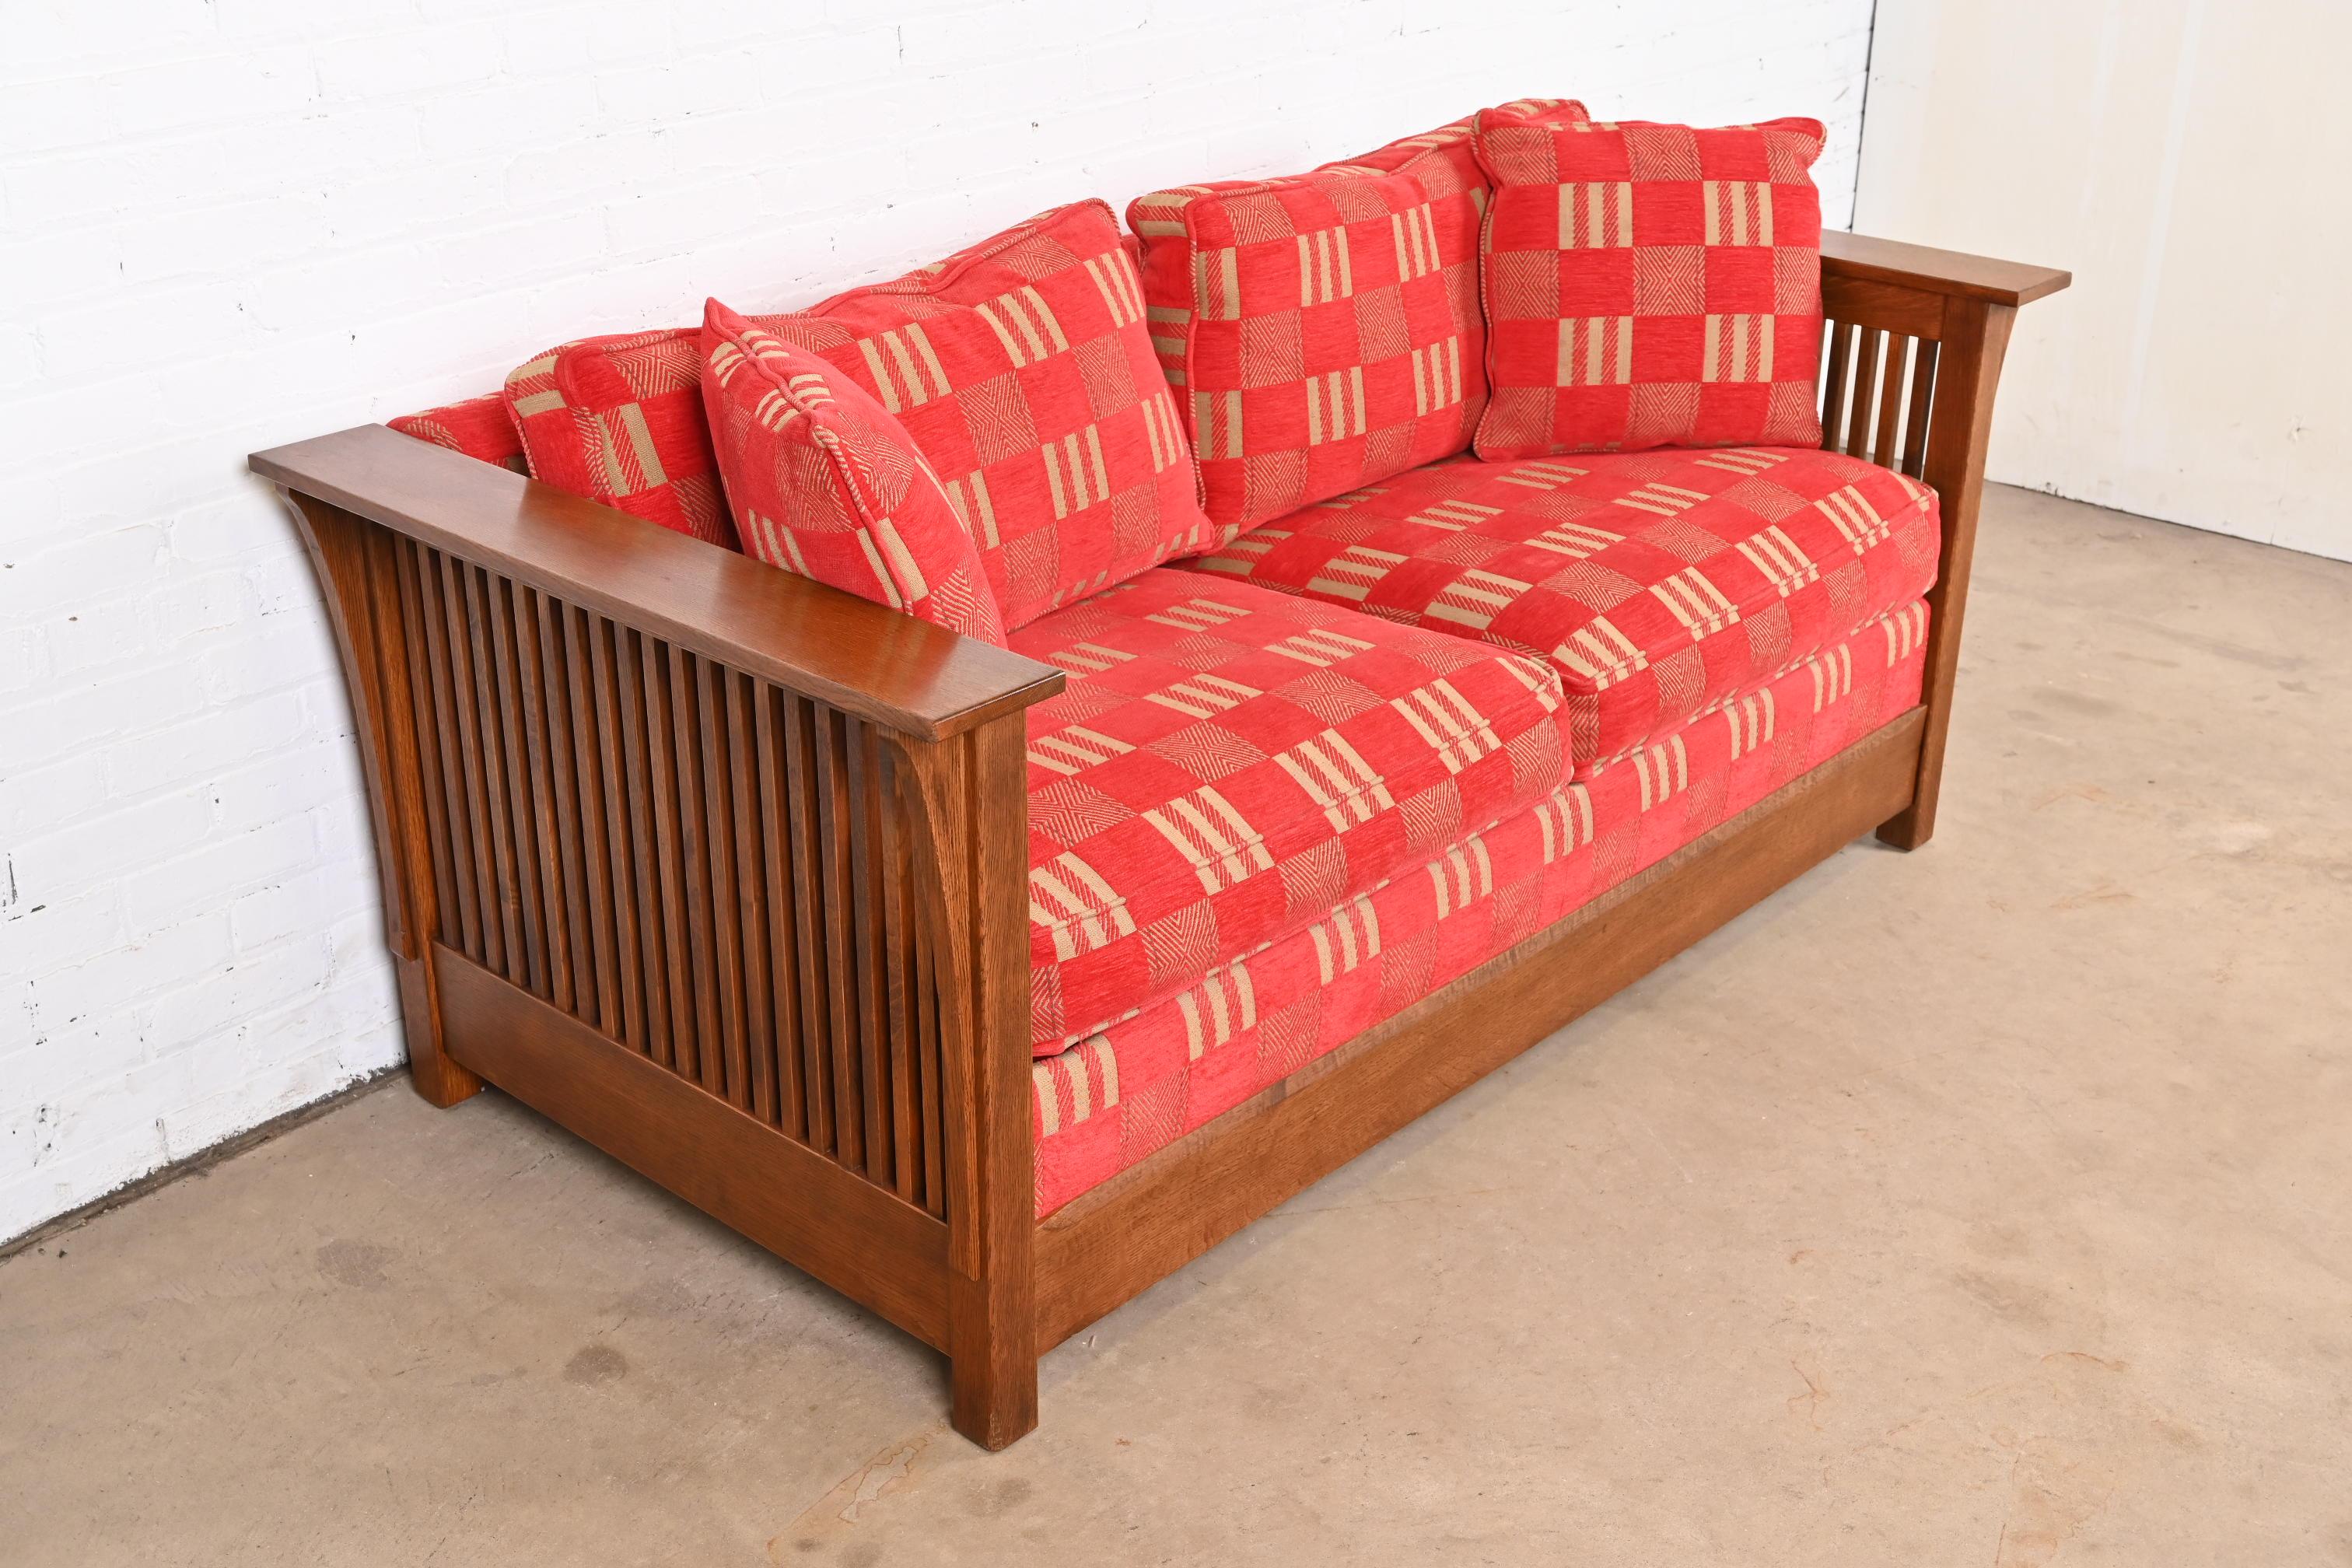 American Stickley Mission Oak Arts and Crafts Spindle Sleeper Sofa or Loveseat